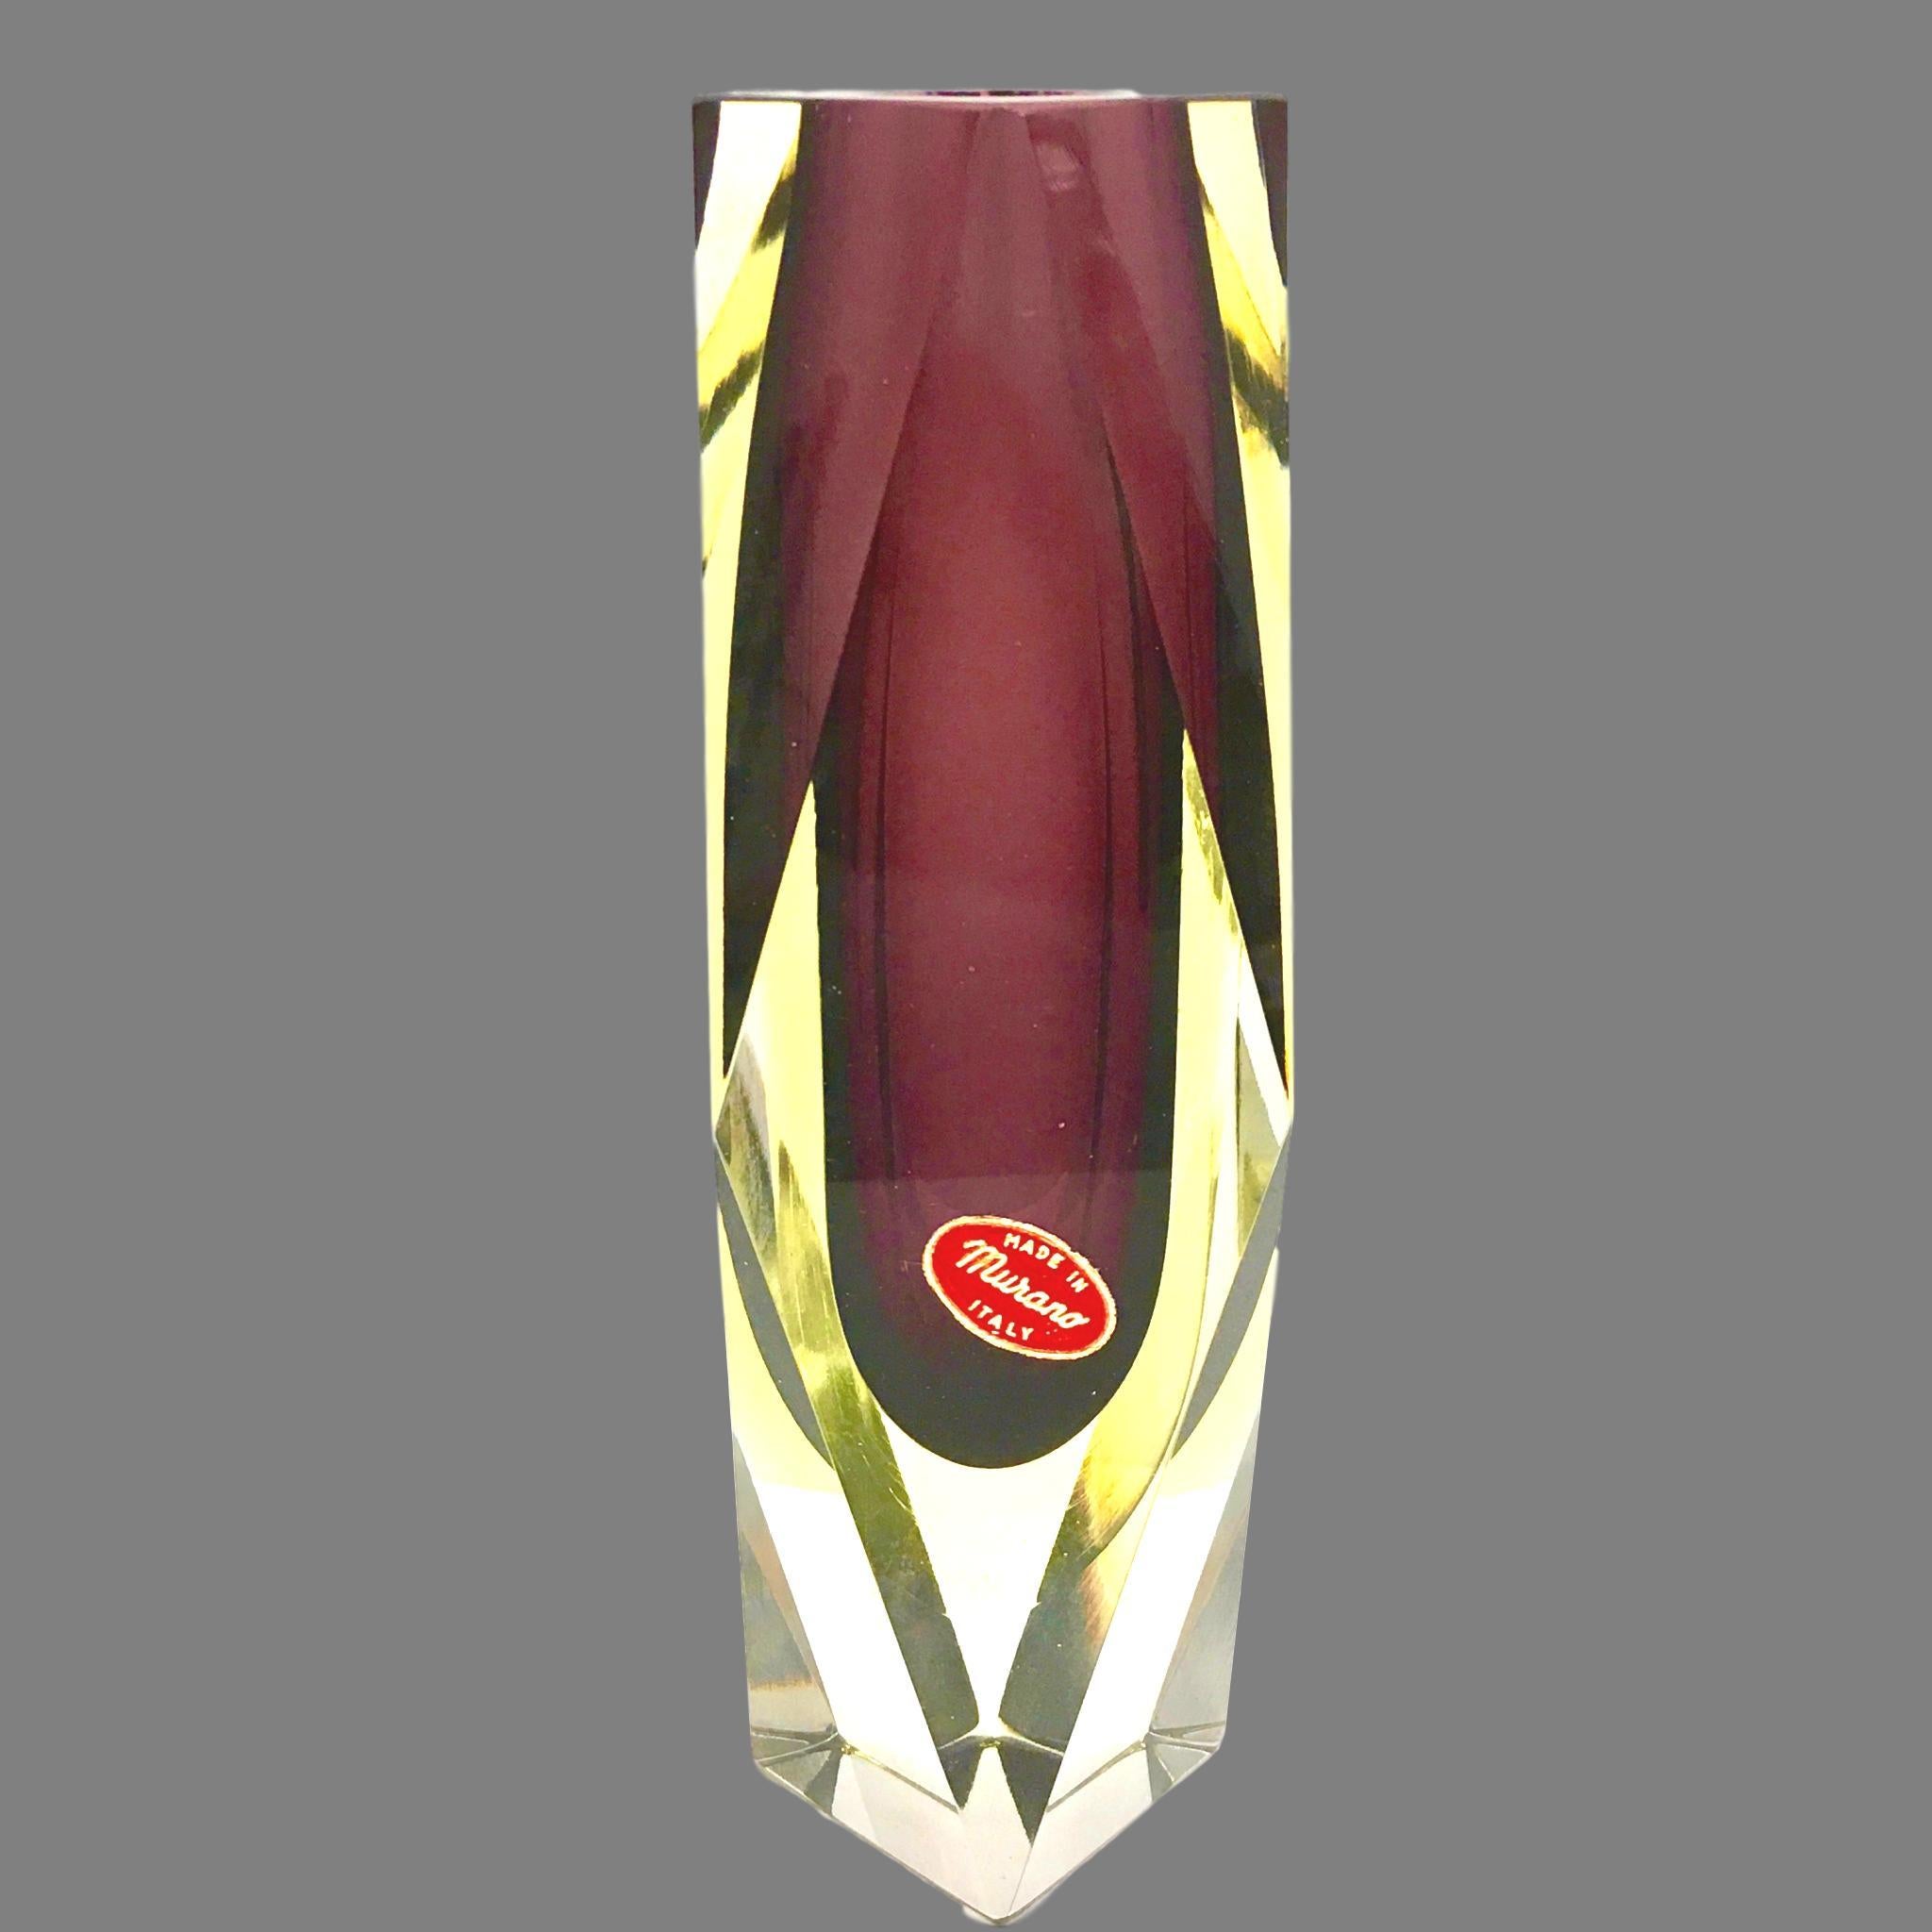 An amazing Venetian Murano glass Mid-Century Modern Mandruzzato vase made in Italy, circa 1960s. This is a heavy glass block vase. Purple on the inside followed by a layer of yellow within clear. The top of the vase is flat cut. Vase is in very good